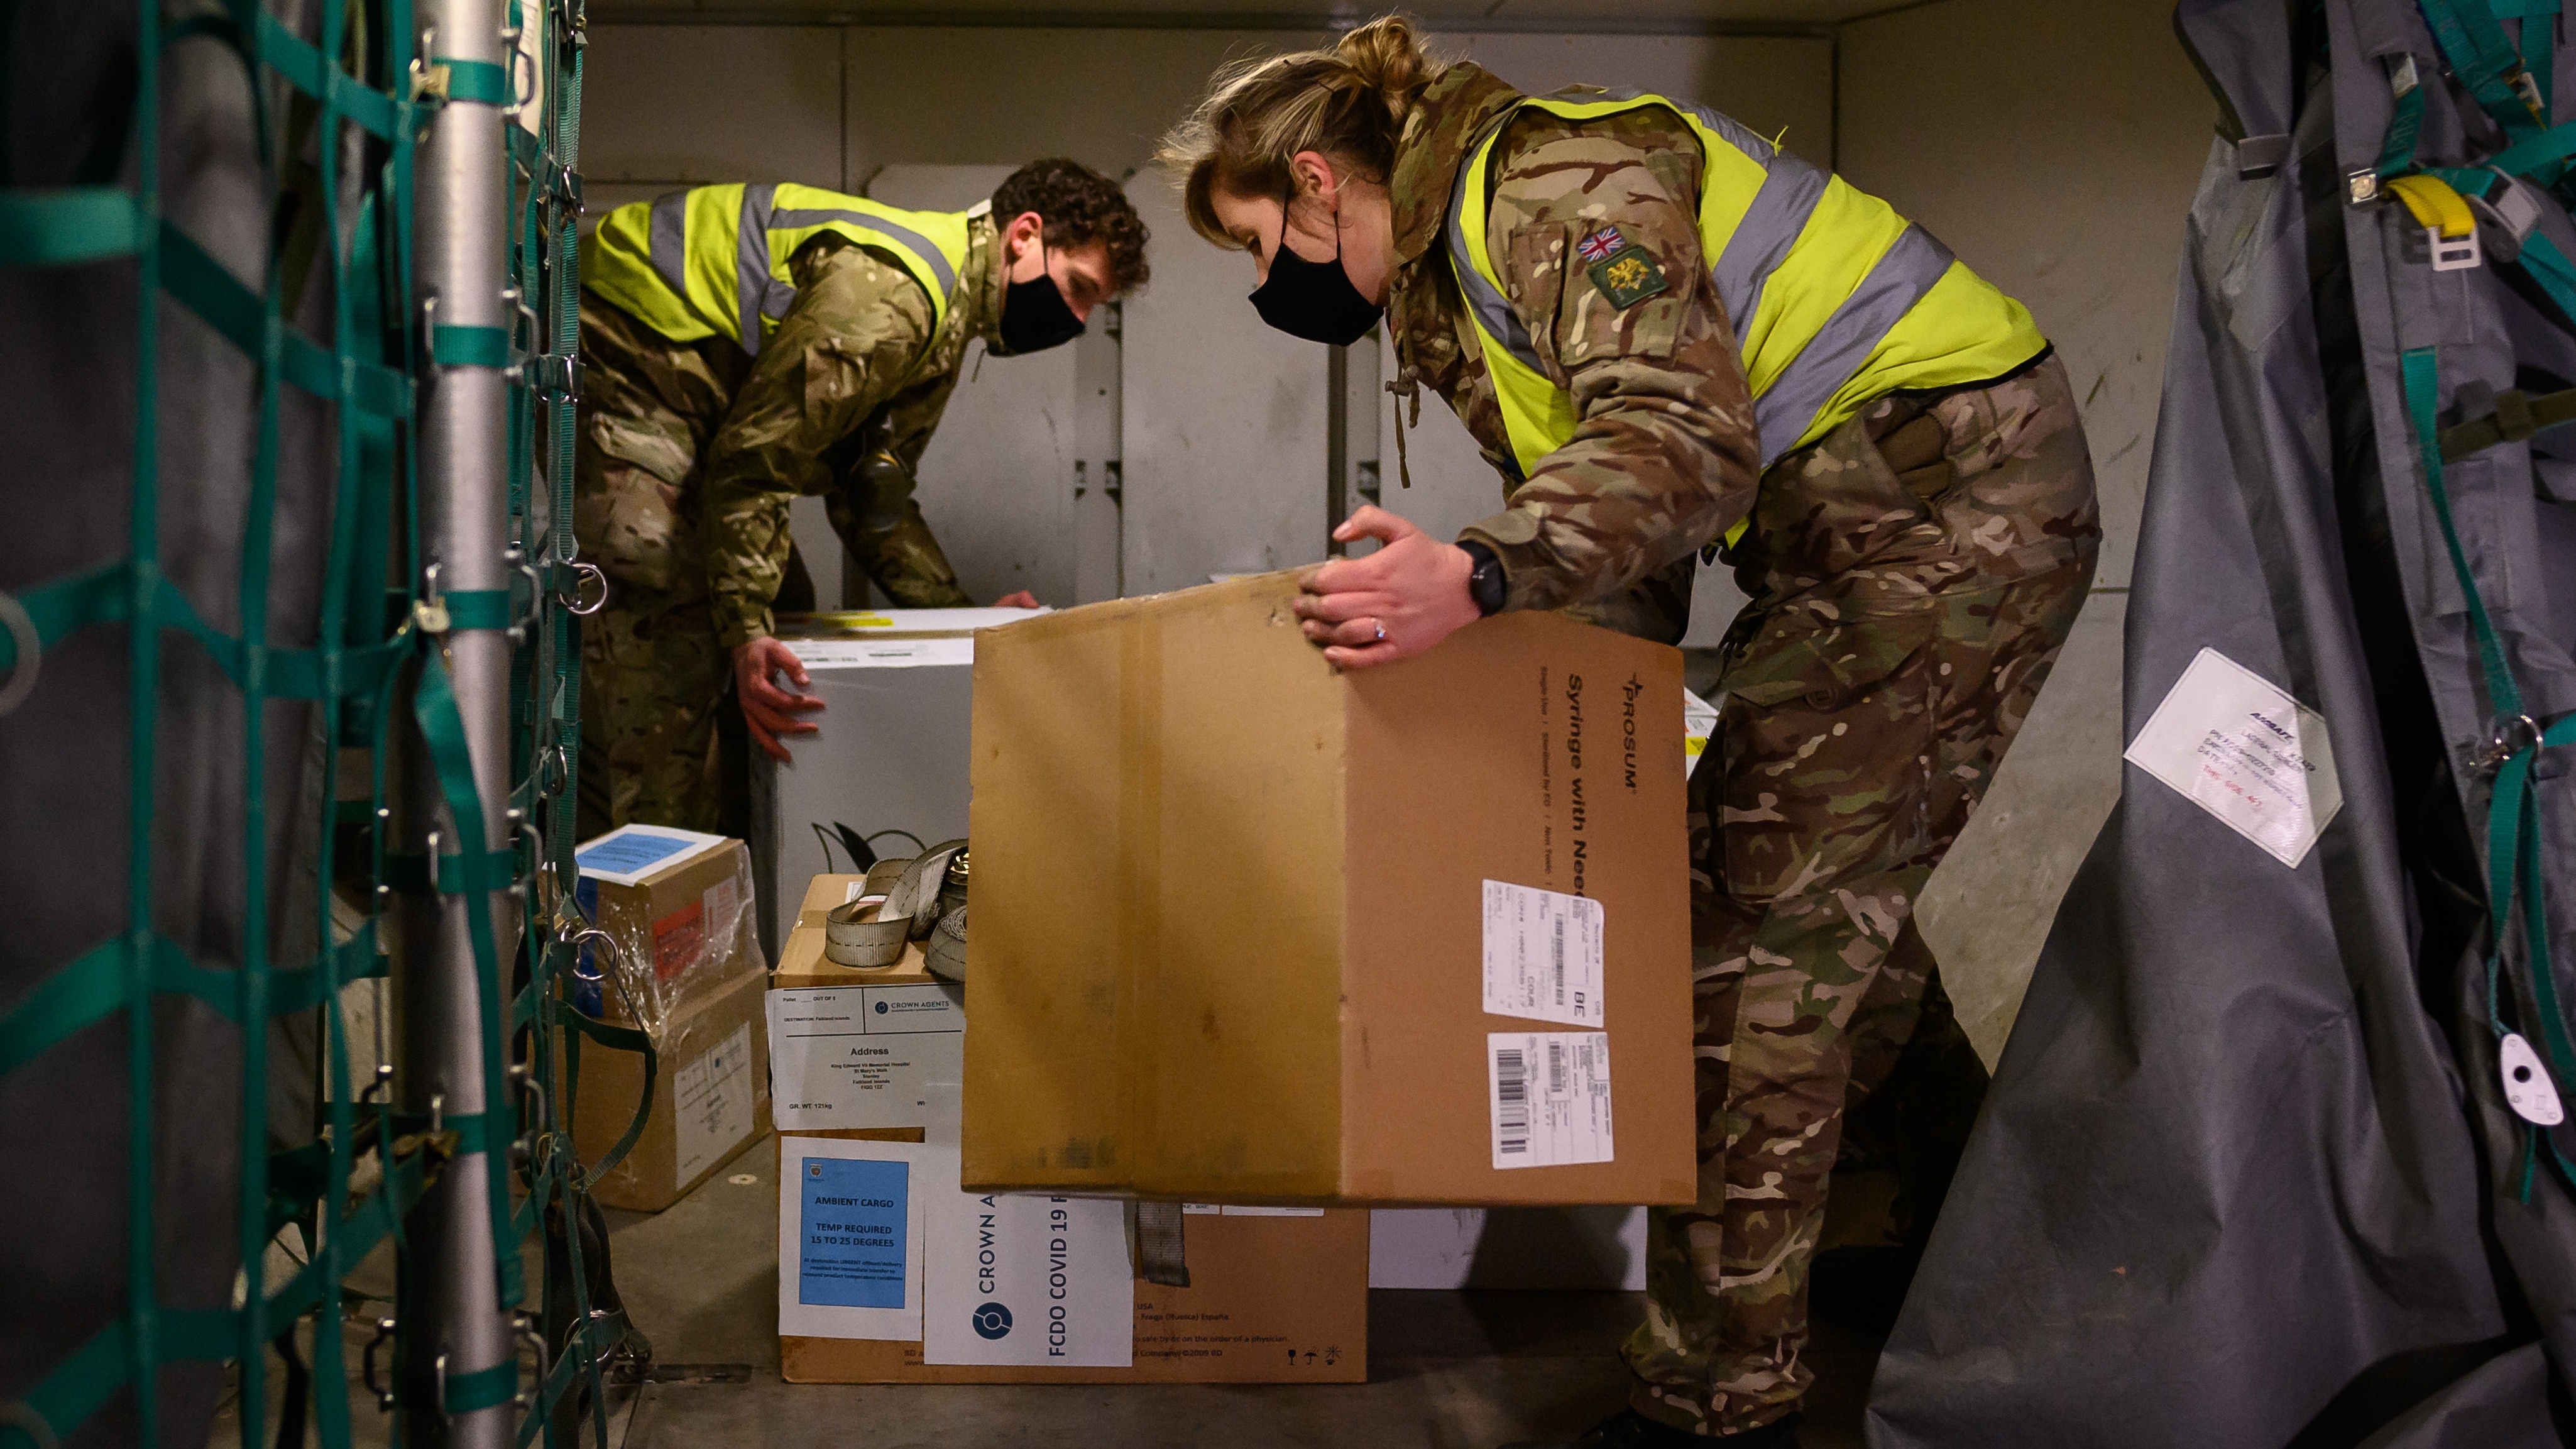 RAF personnel load a batch of the Covid-19 vaccine onto an aircraft